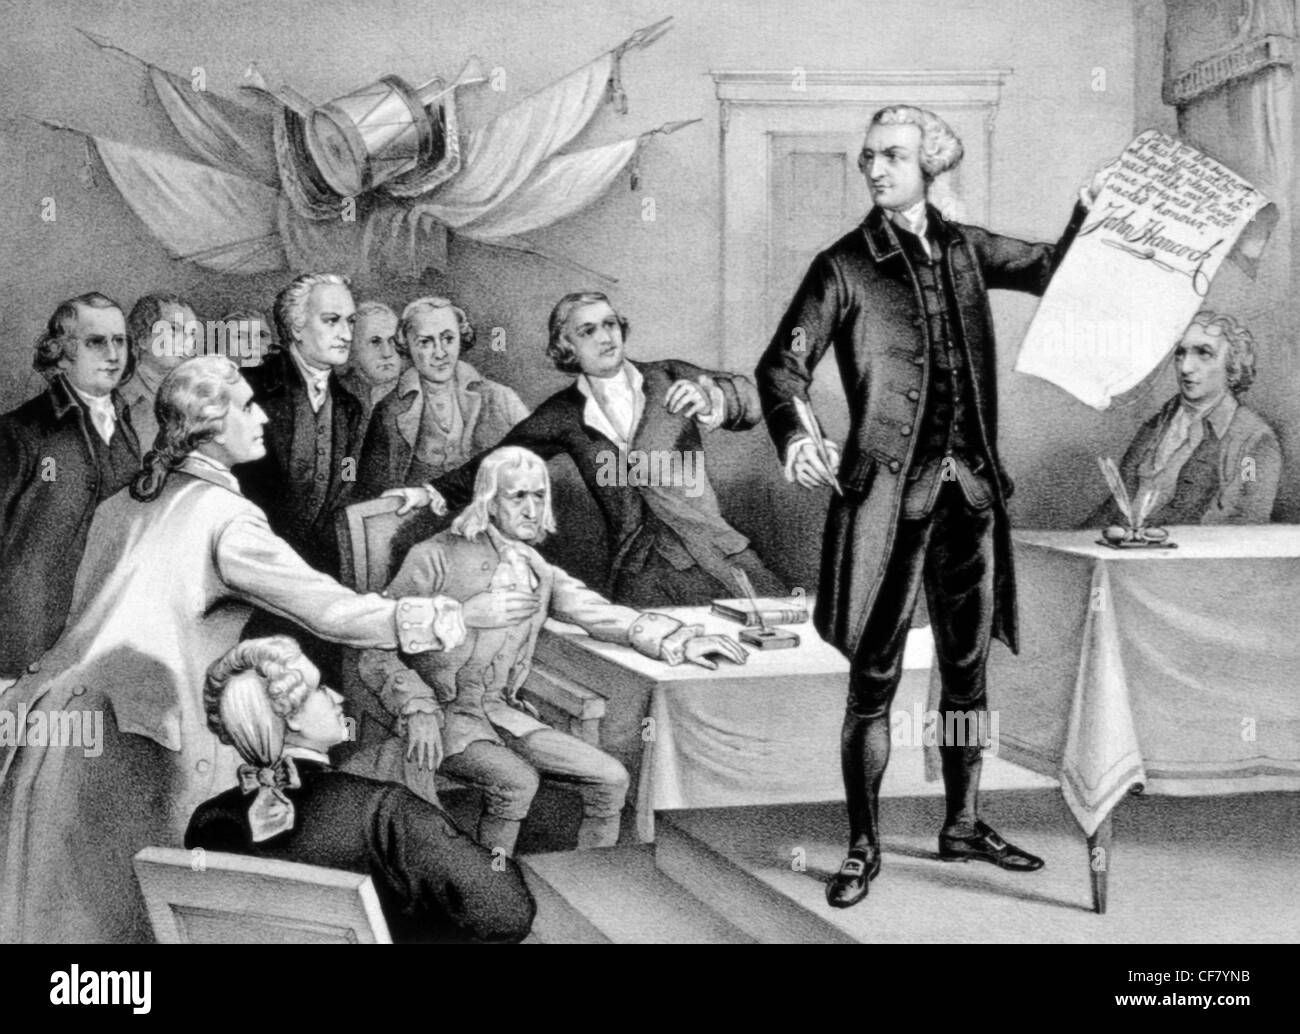 Vintage lithograph print of American statesman John Hancock (1737 - 1793) brandishing the US Declaration of Independence with his signature on it. Stock Photo